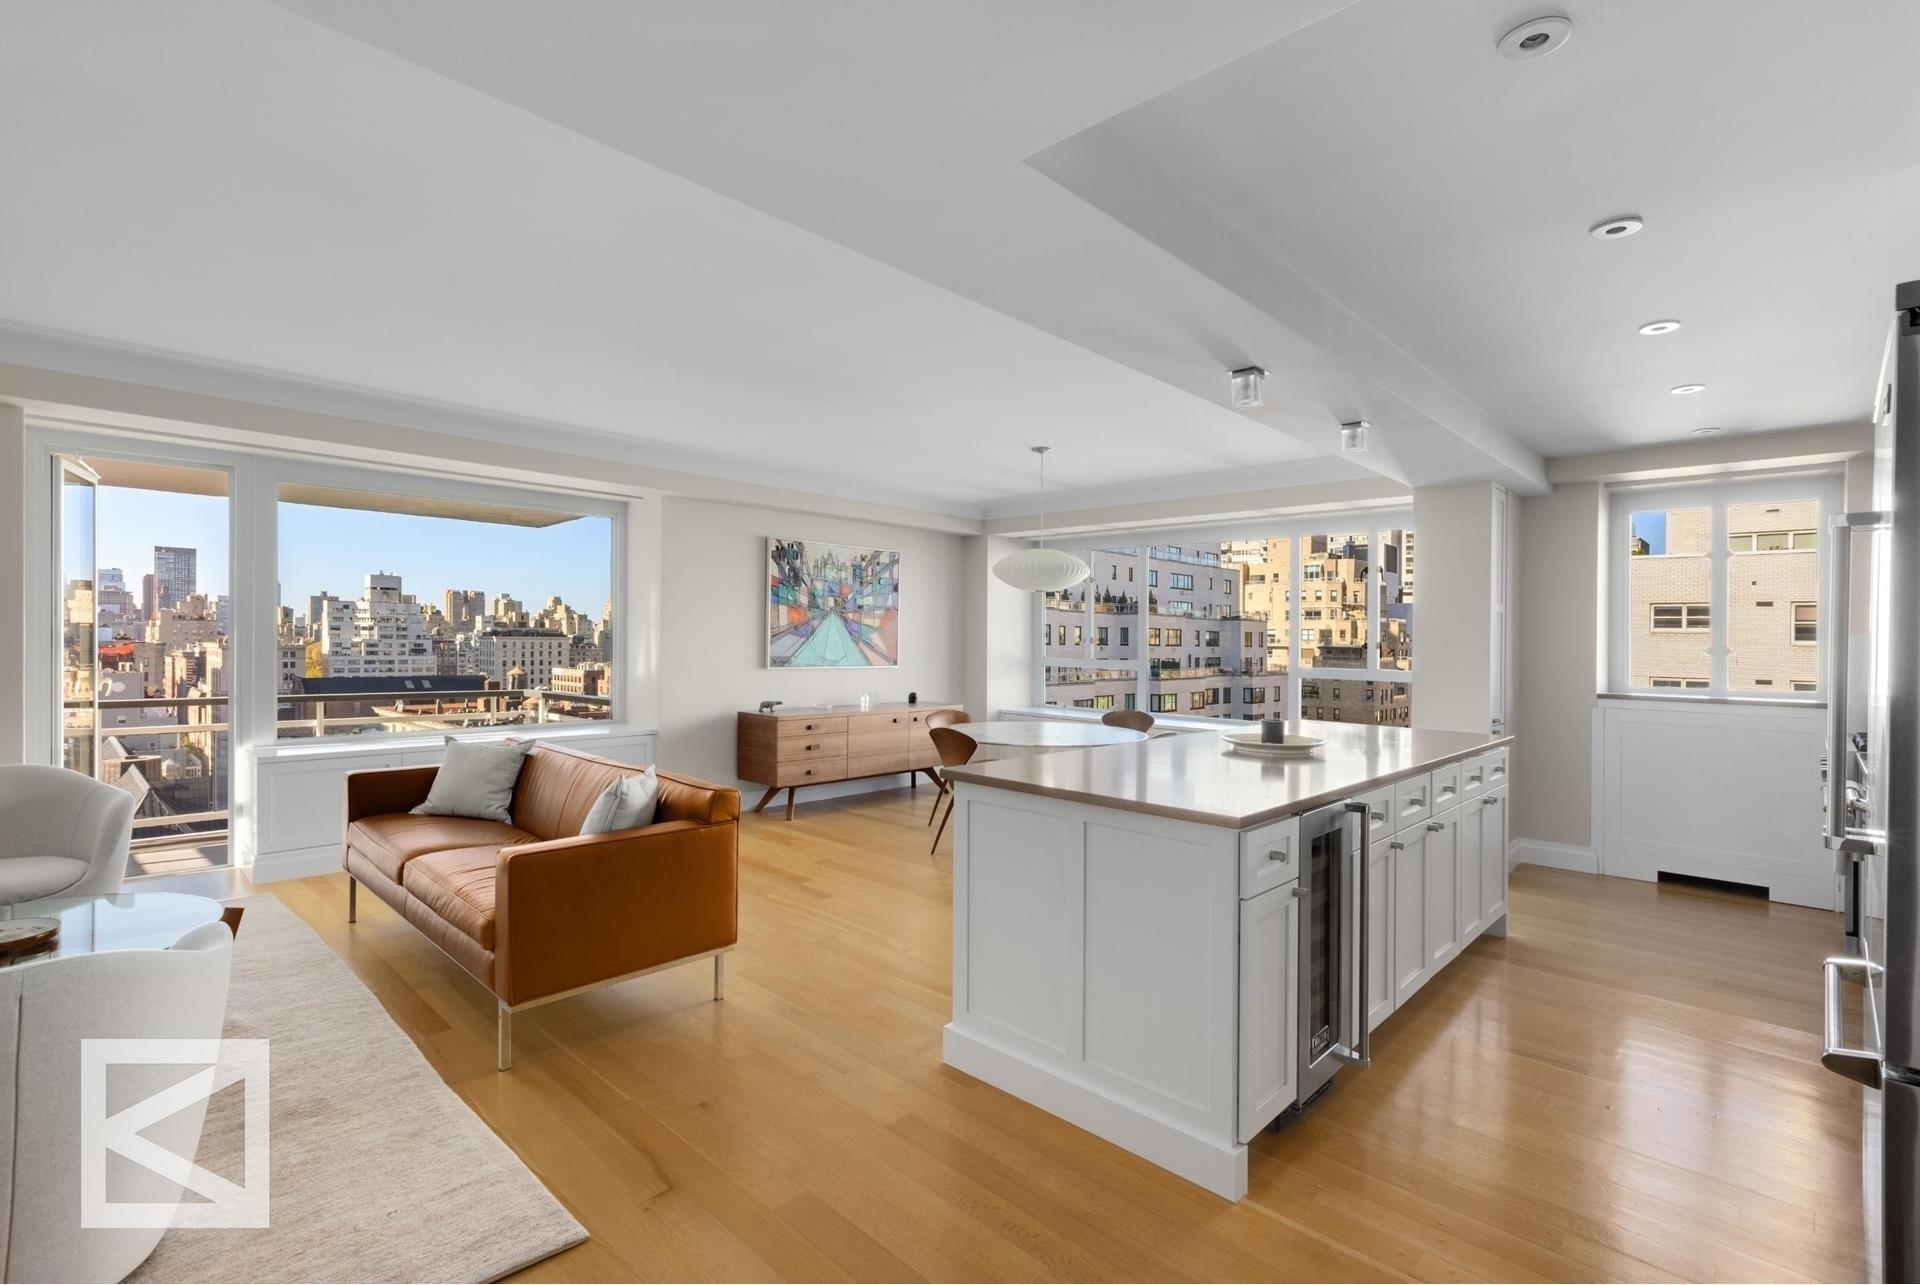 1. Condominiums for Sale at 200 E 66TH ST, A1906 Lenox Hill, New York, New York 10065